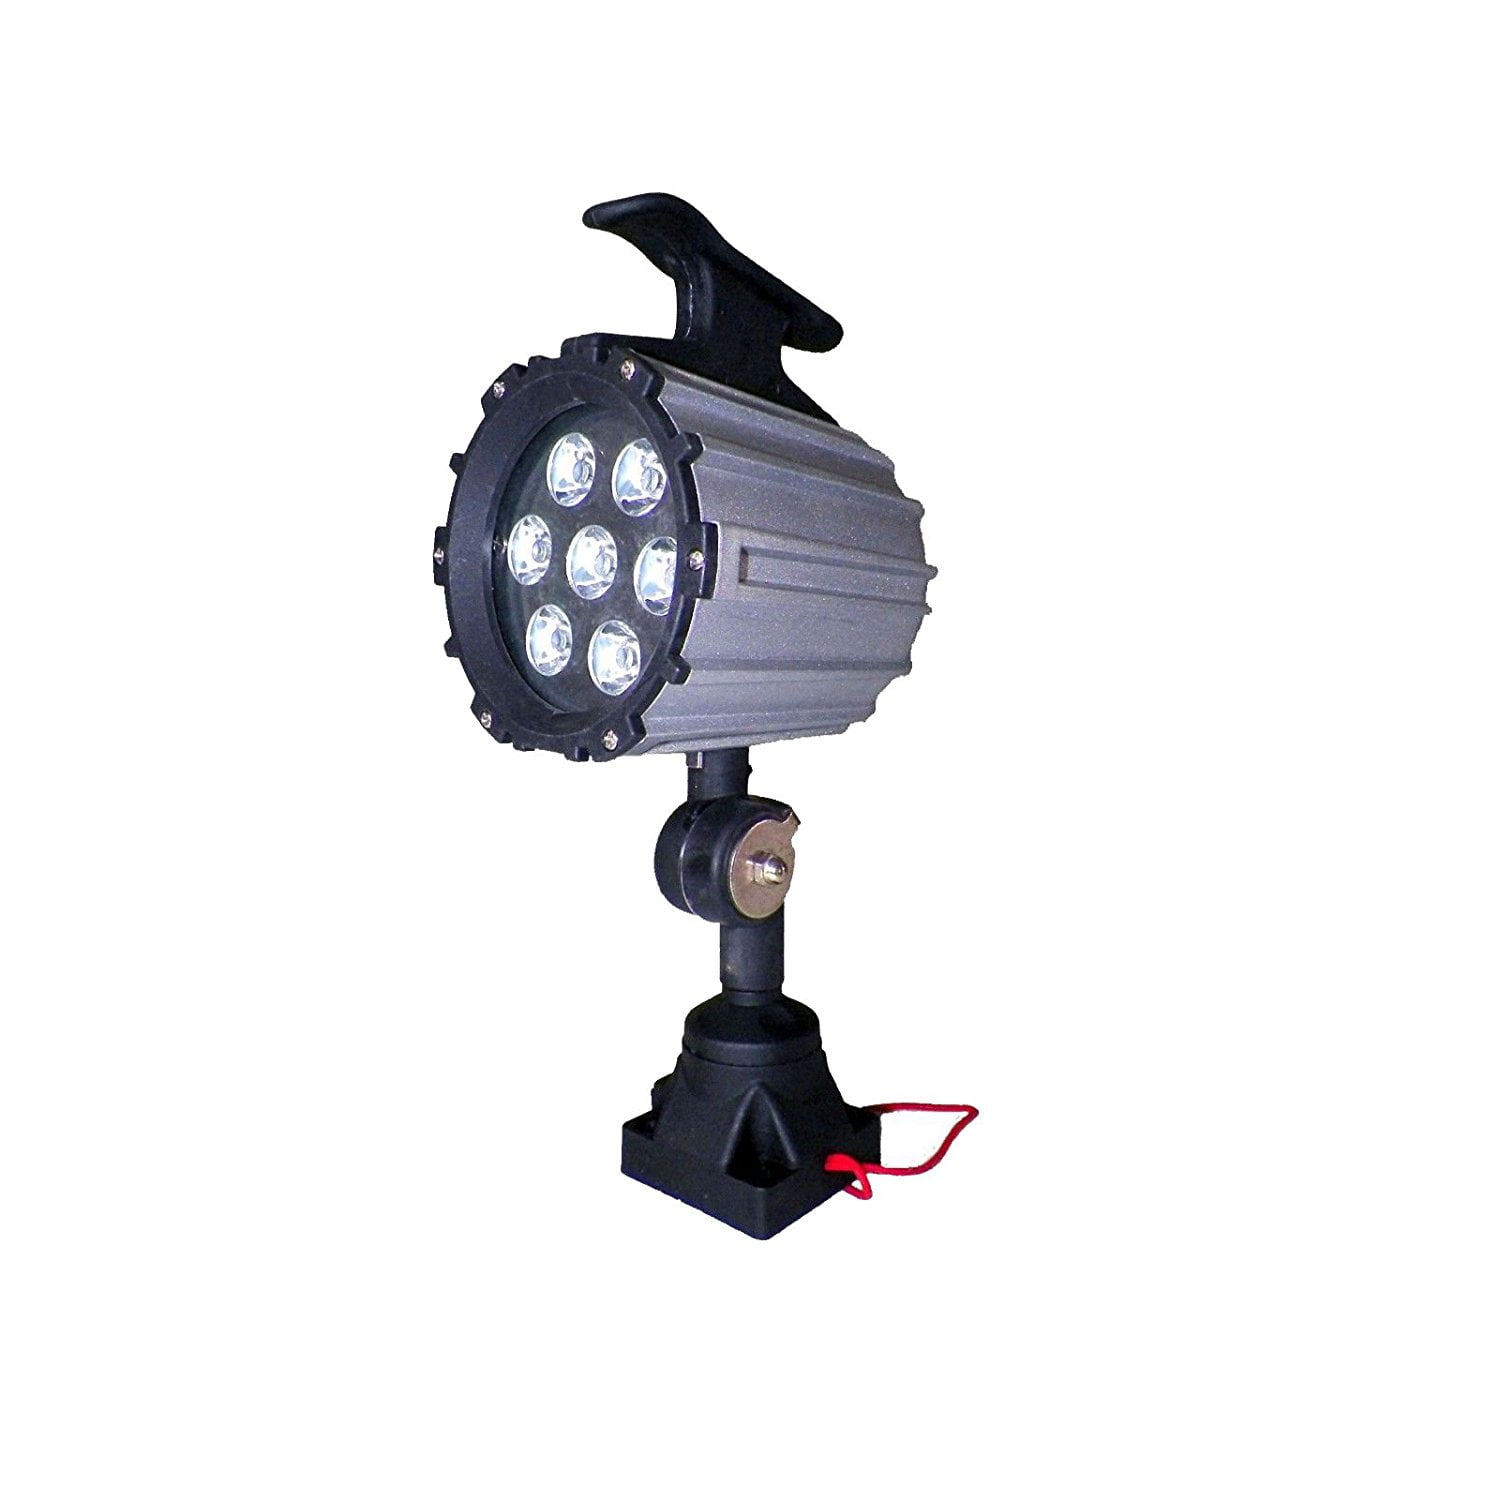 CNC MACHINE EM WORK LIGHT LAMP LED WITH SWING ARM Made in TAIWAN L81 24V water 